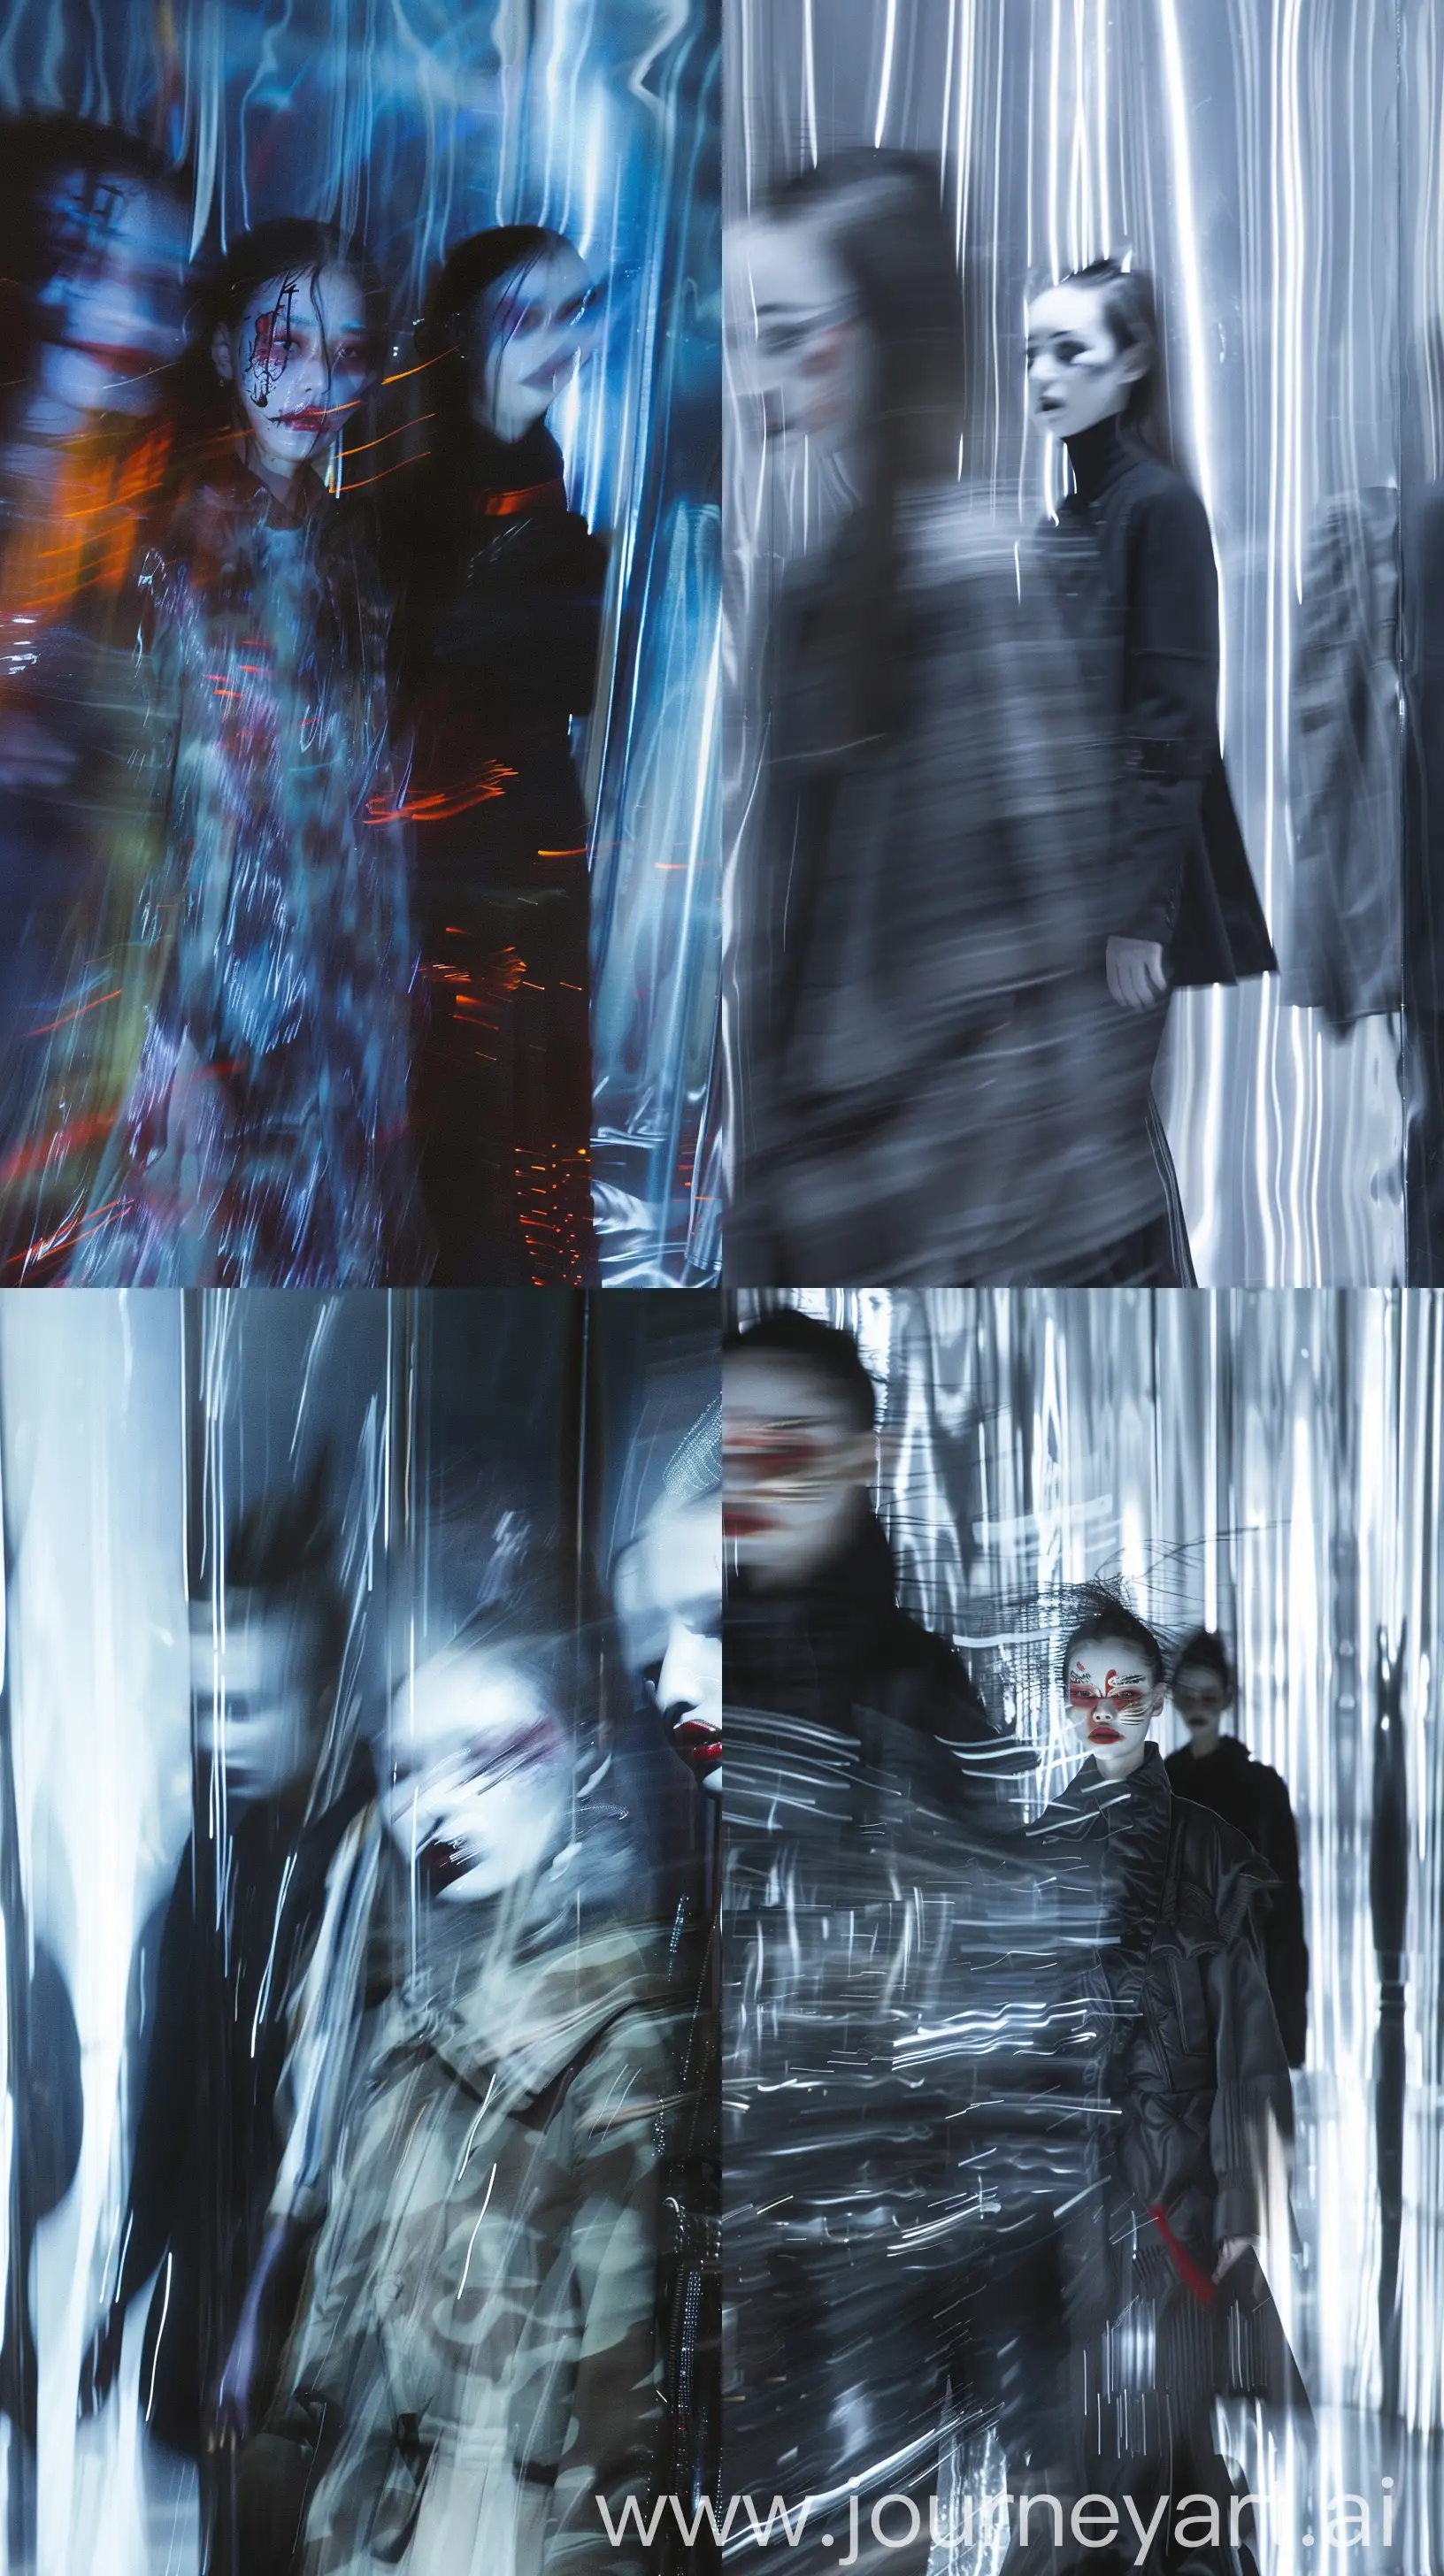 Ethereal-Oriental-Fashion-Haunting-High-Fashion-Scene-with-Blurred-Female-Models